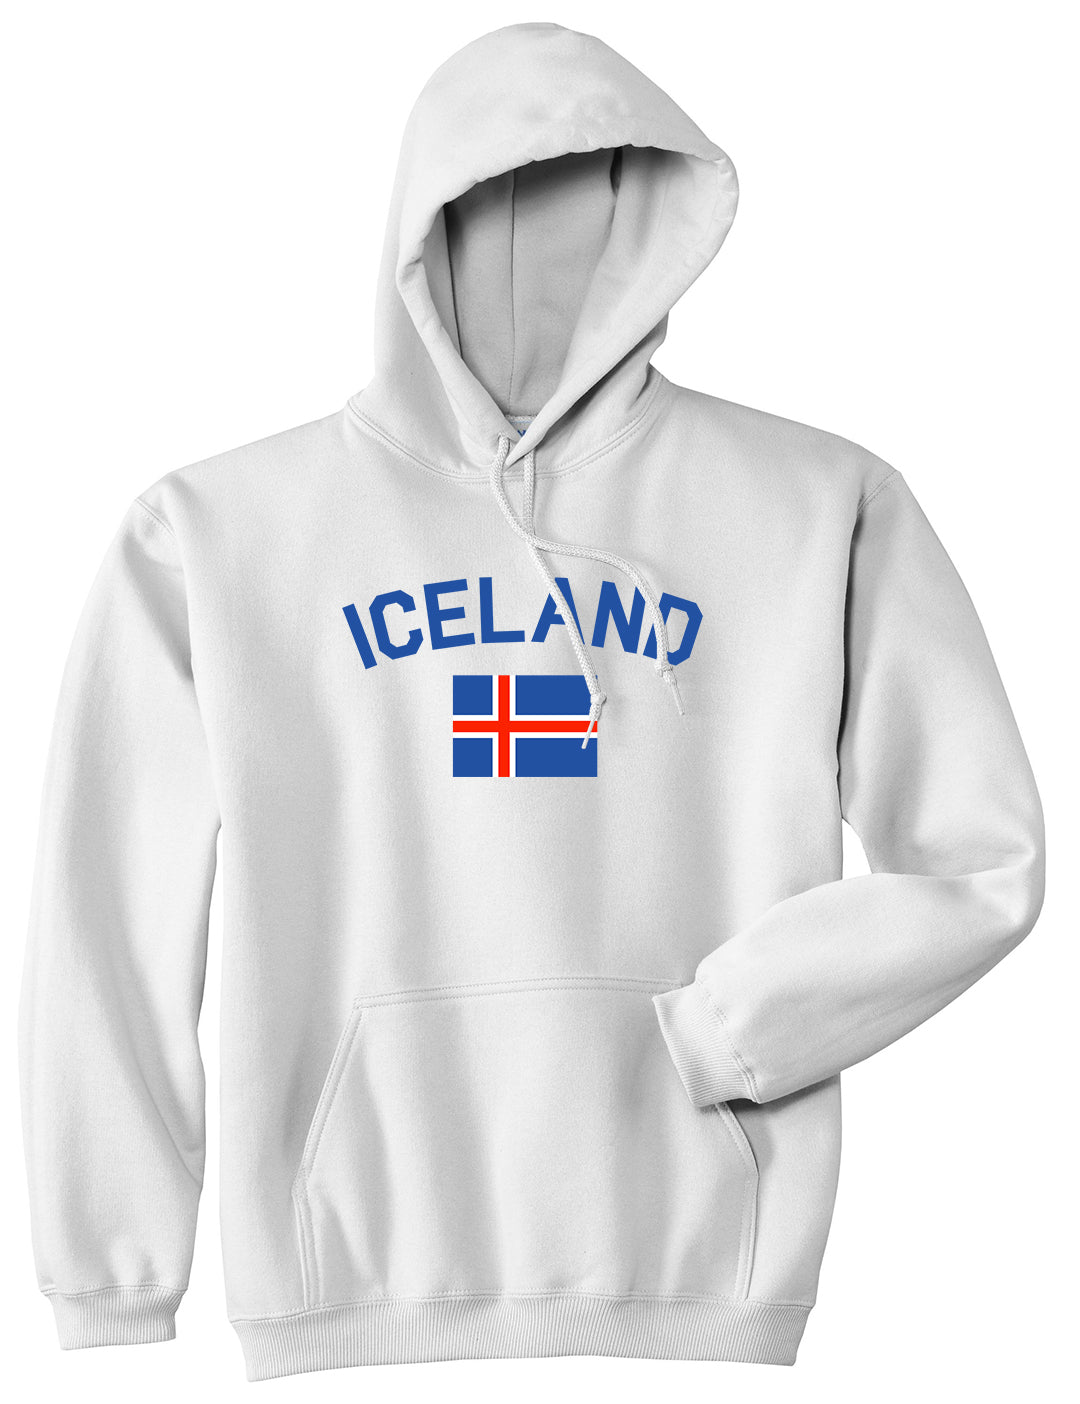 Iceland With Icelandic Flag Souvenir Mens Pullover Hoodie White